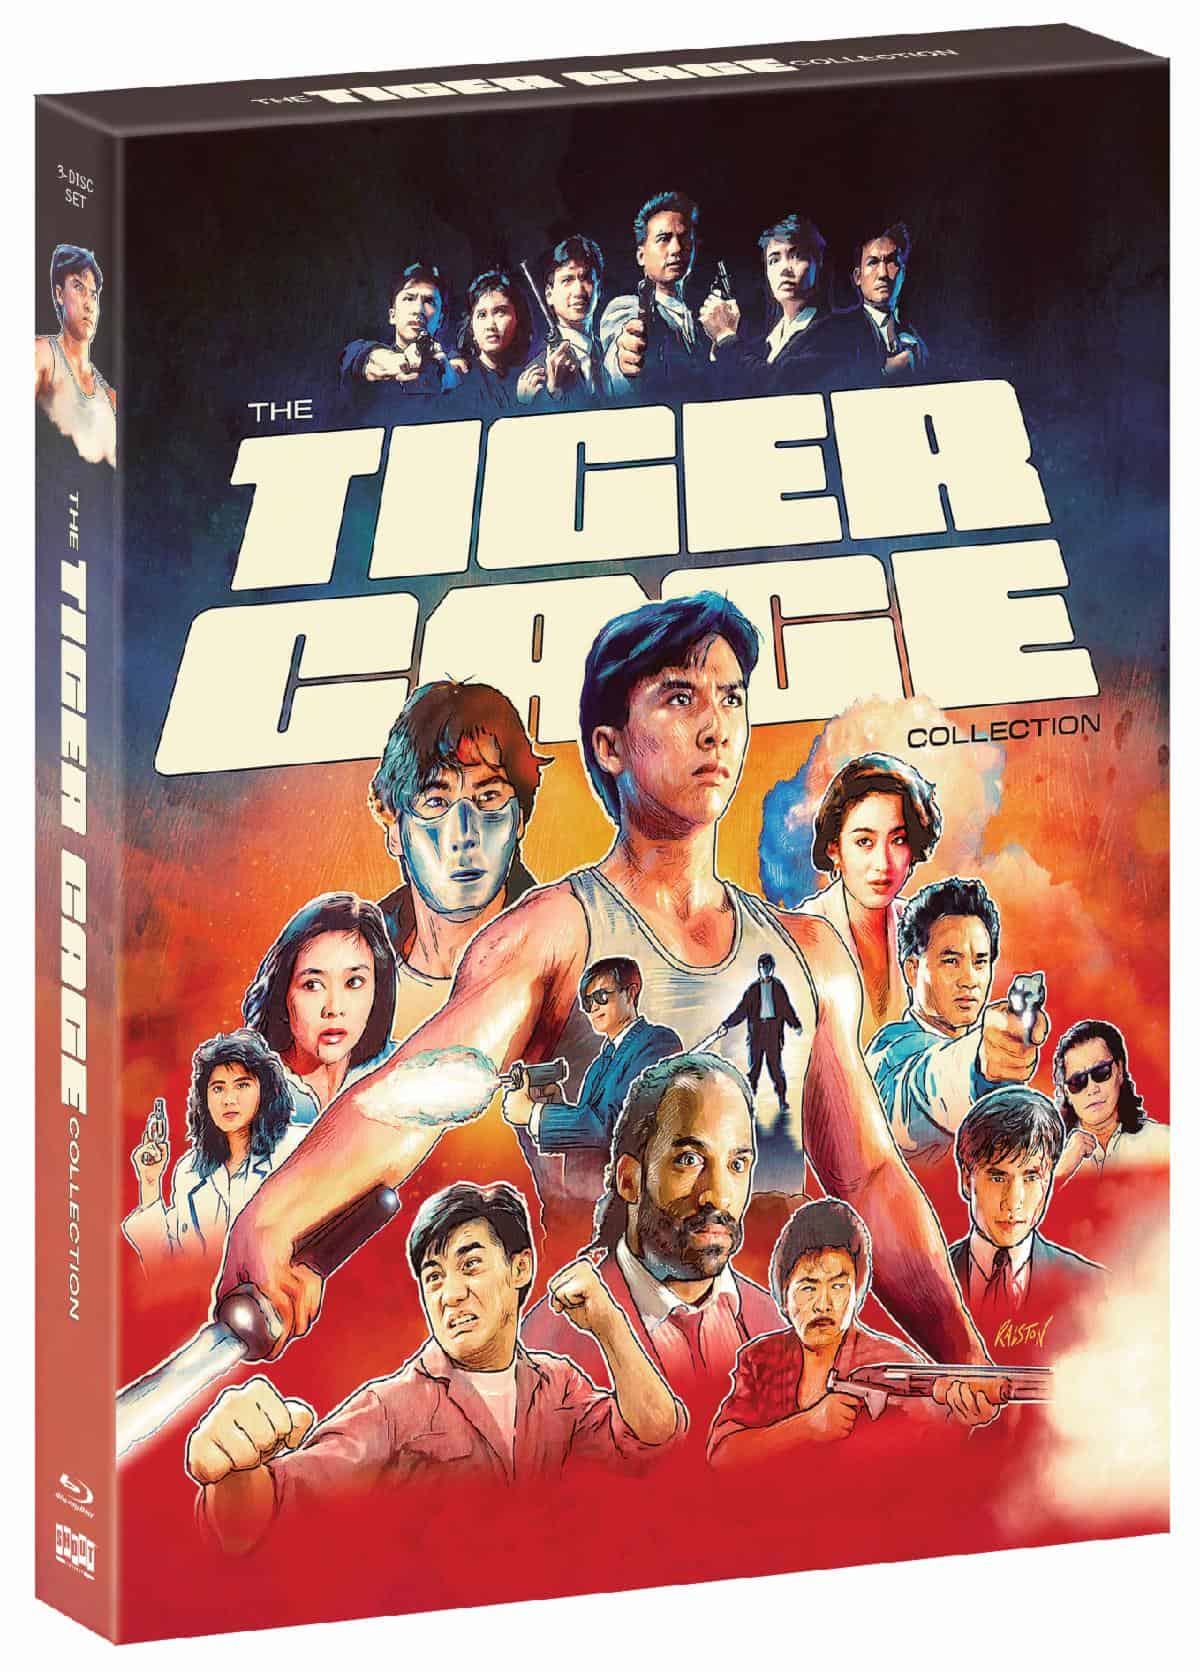 The Tiger Cage Collection hits Blu-ray on May 9th from Shout! 25